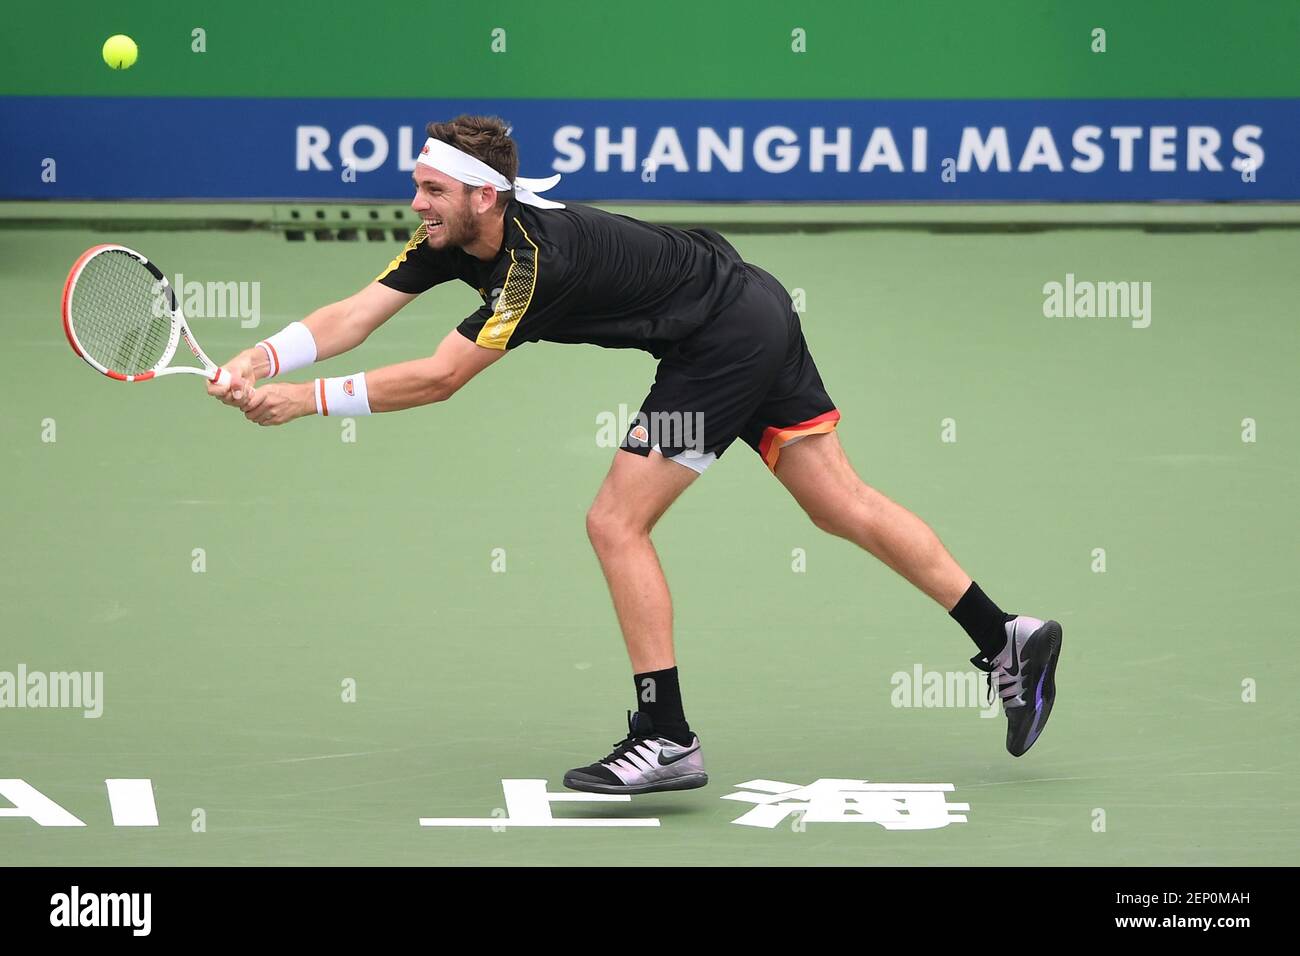 British professional tennis player Cameron Norrie competes against French  professional tennis player Gilles Simon during the first round of 2019  Rolex Shanghai Masters, in Shanghai, China, 7 October 2019. British  professional tennis